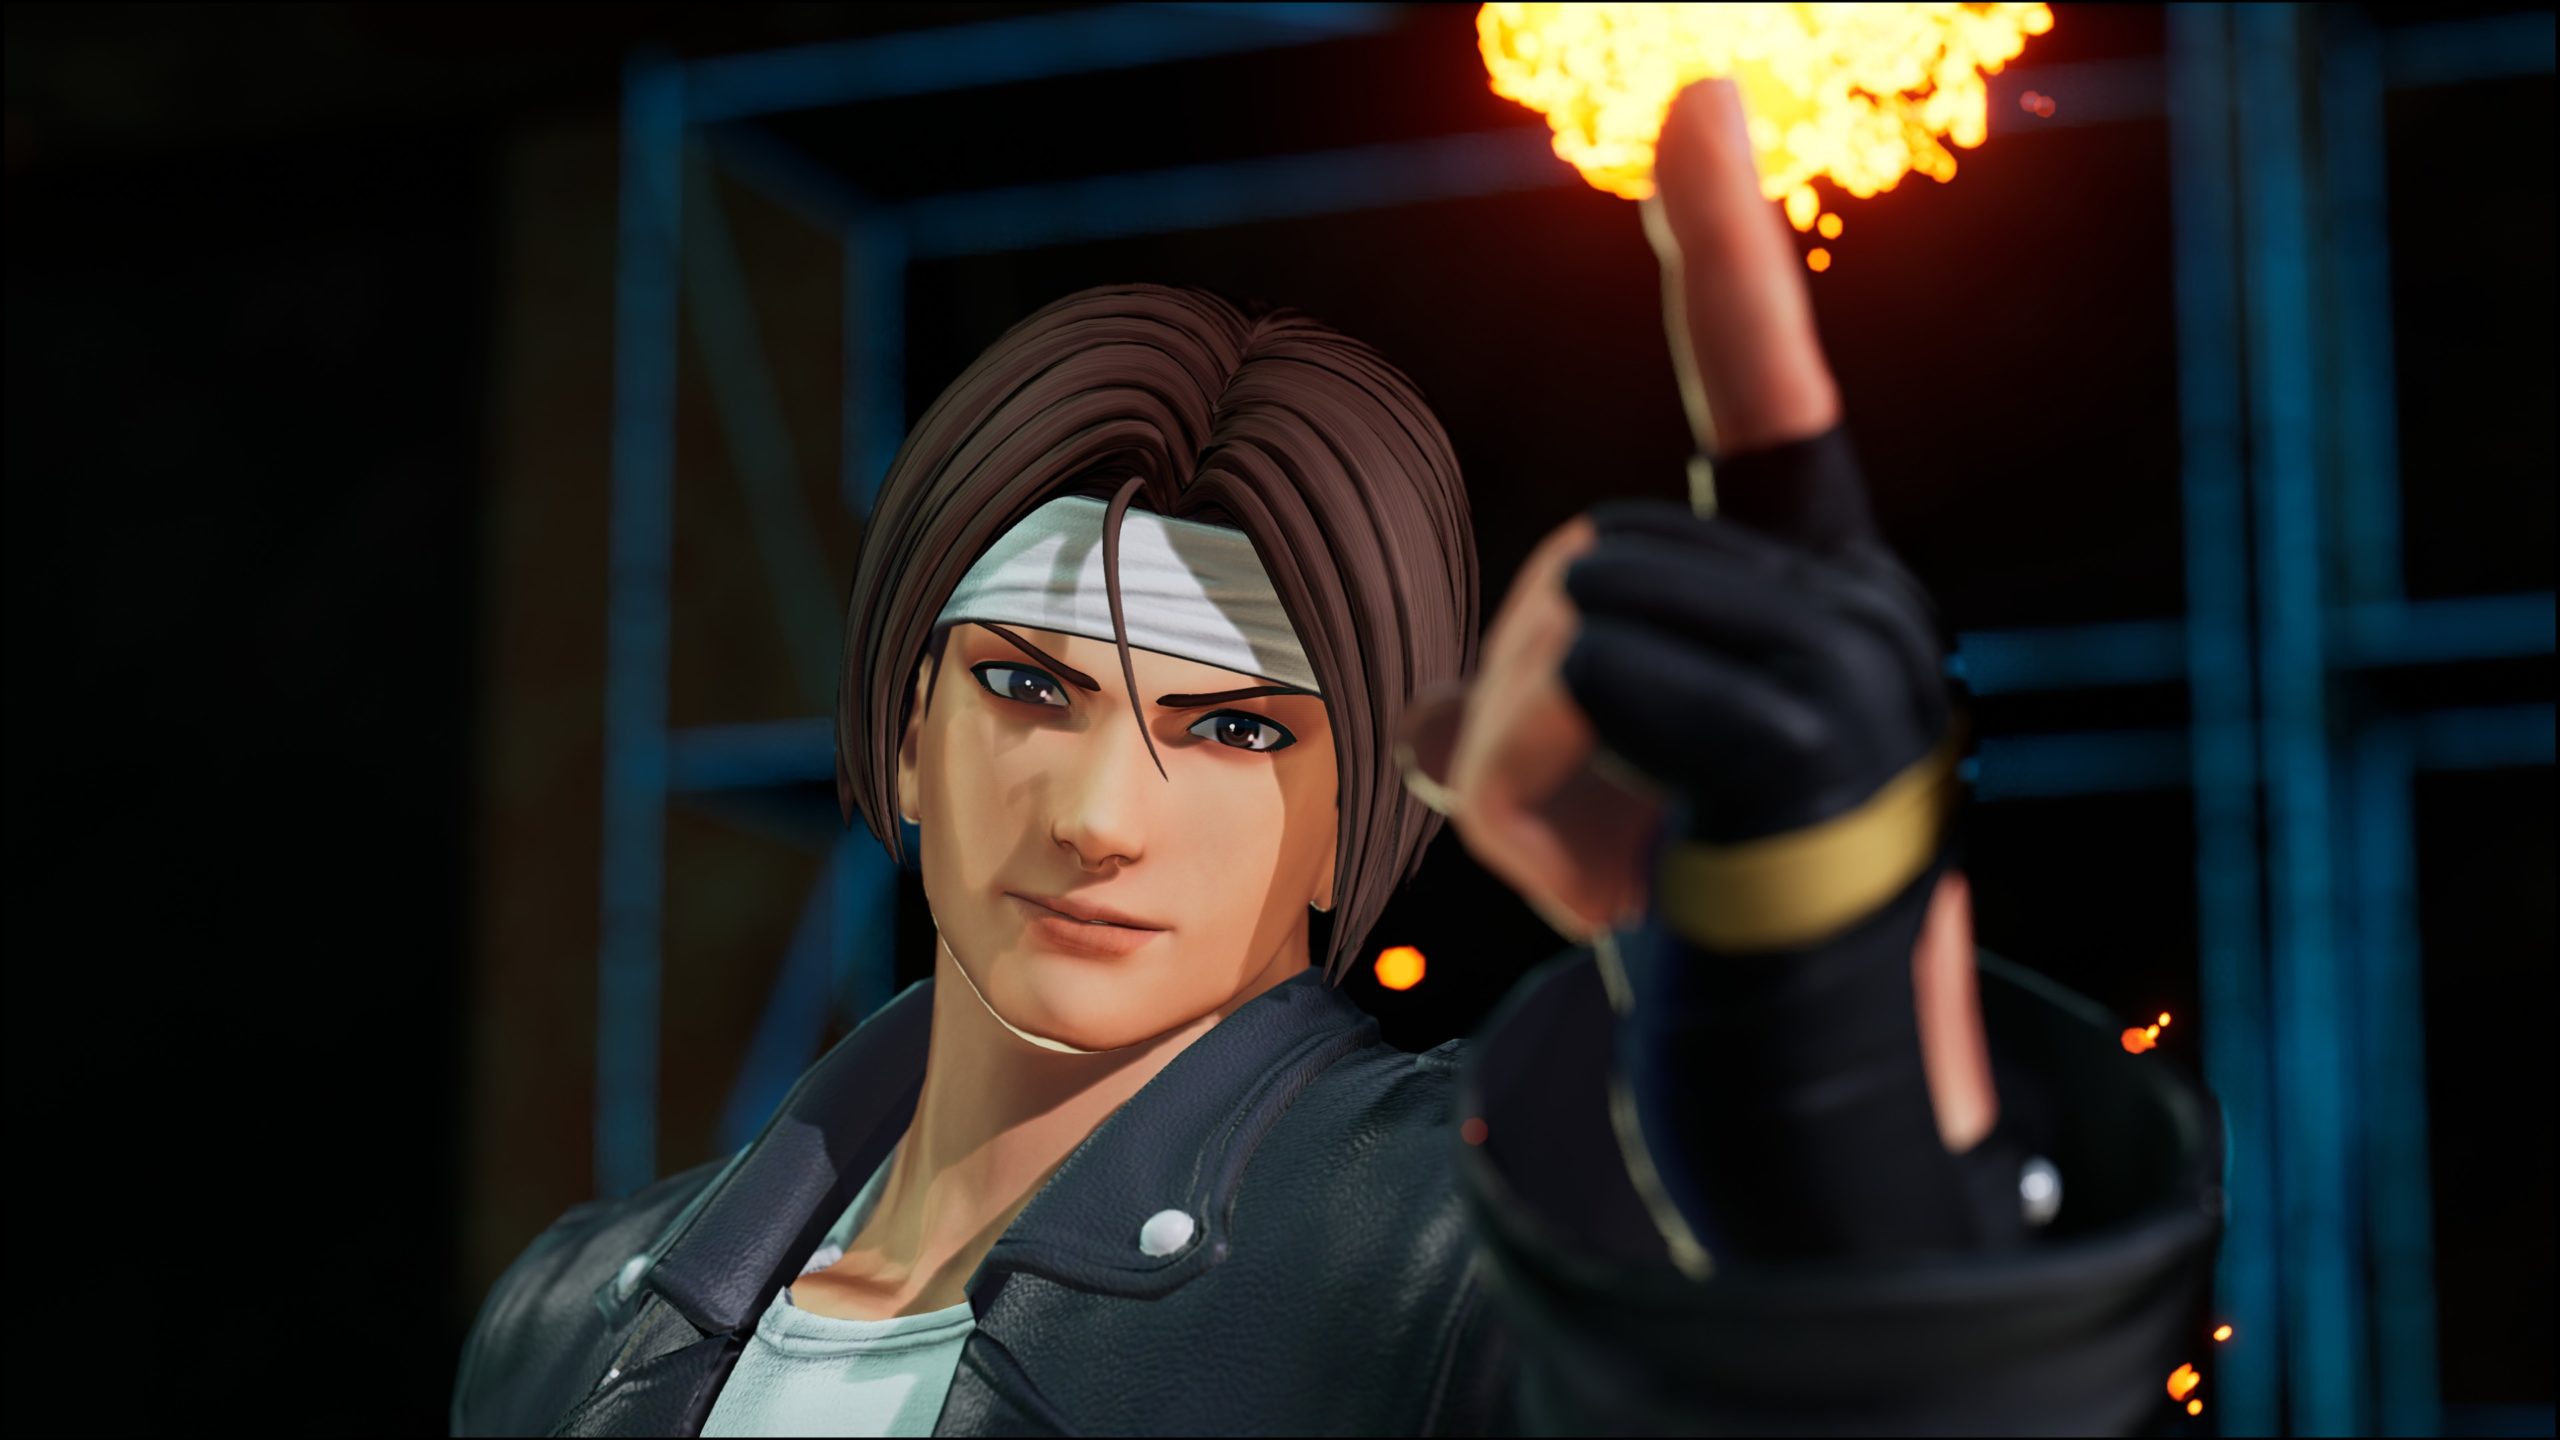 What are your thoughts on Iori Yagami? : r/kof